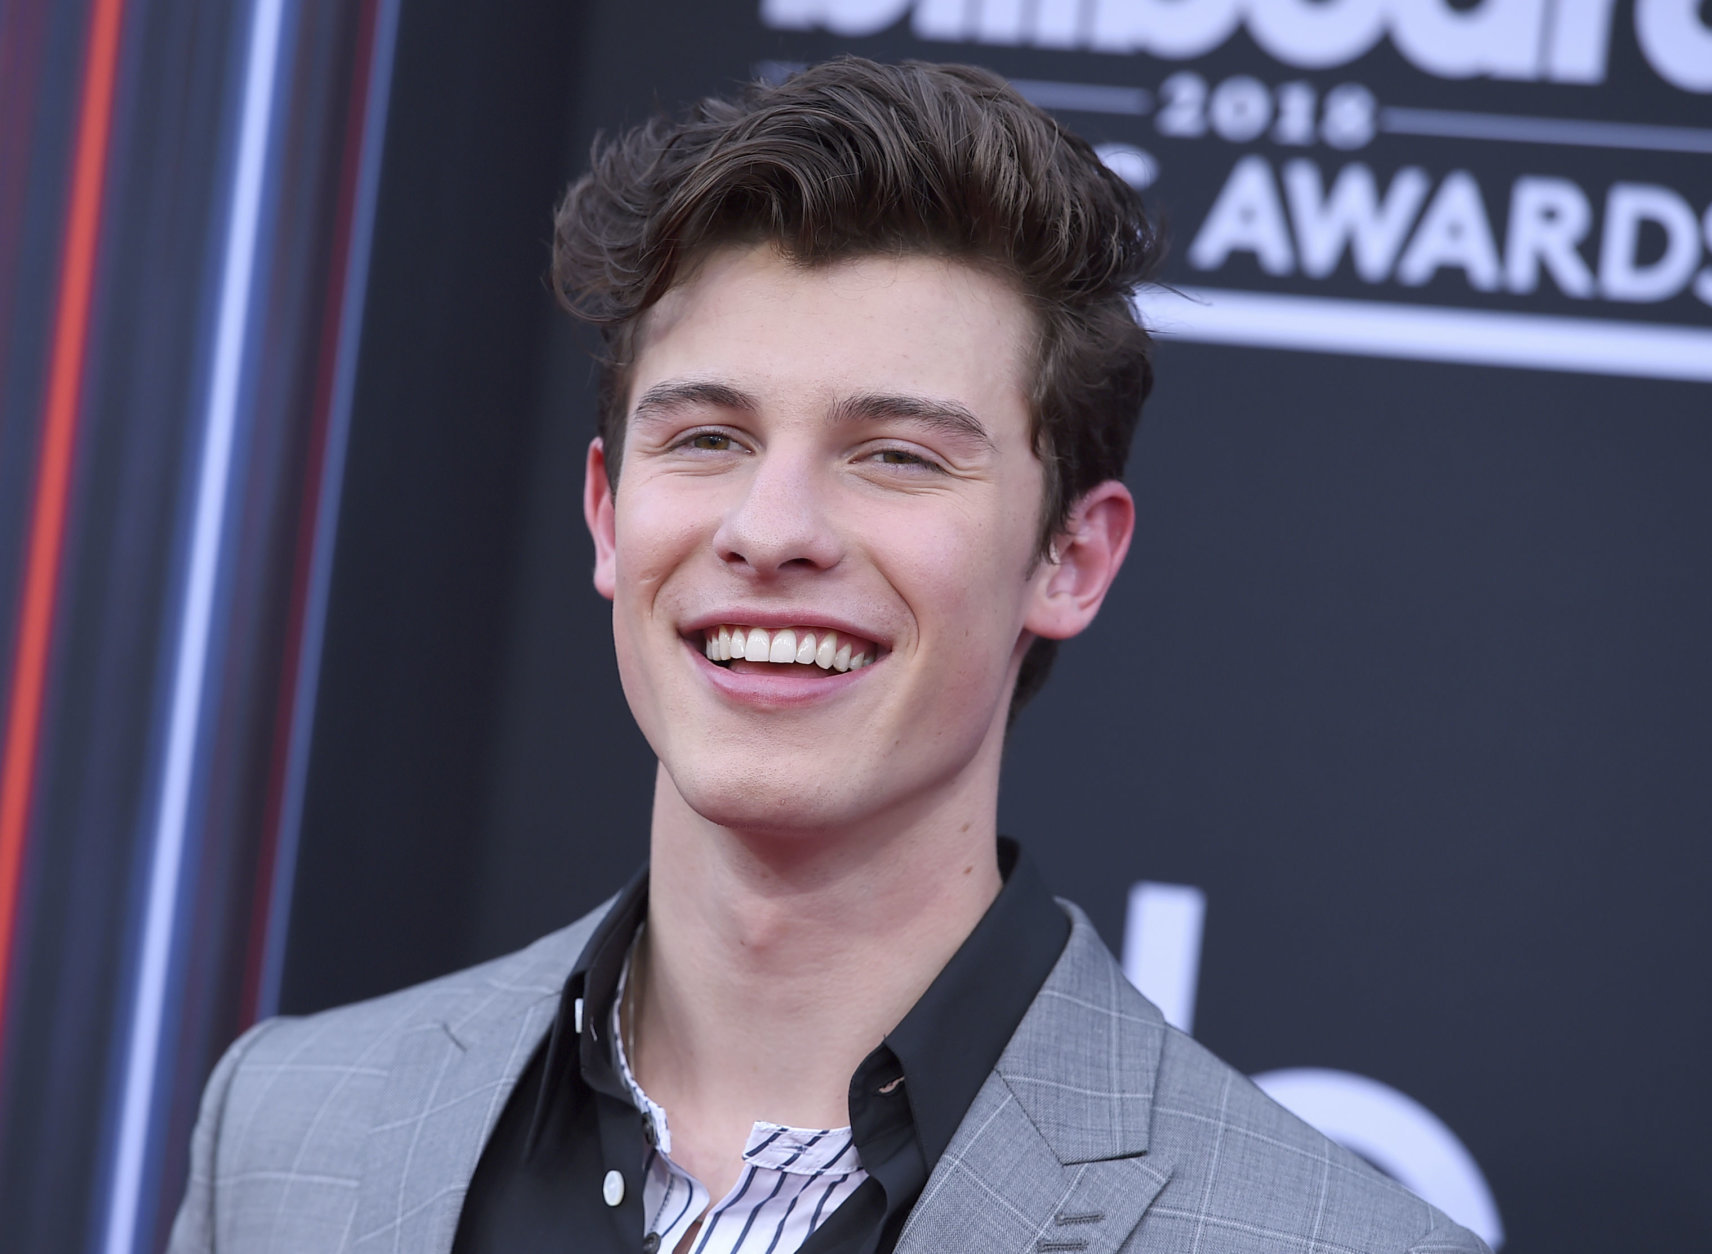 Shawn Mendes arrives at the Billboard Music Awards at the MGM Grand Garden Arena on Sunday, May 20, 2018, in Las Vegas. (Photo by Jordan Strauss/Invision/AP)